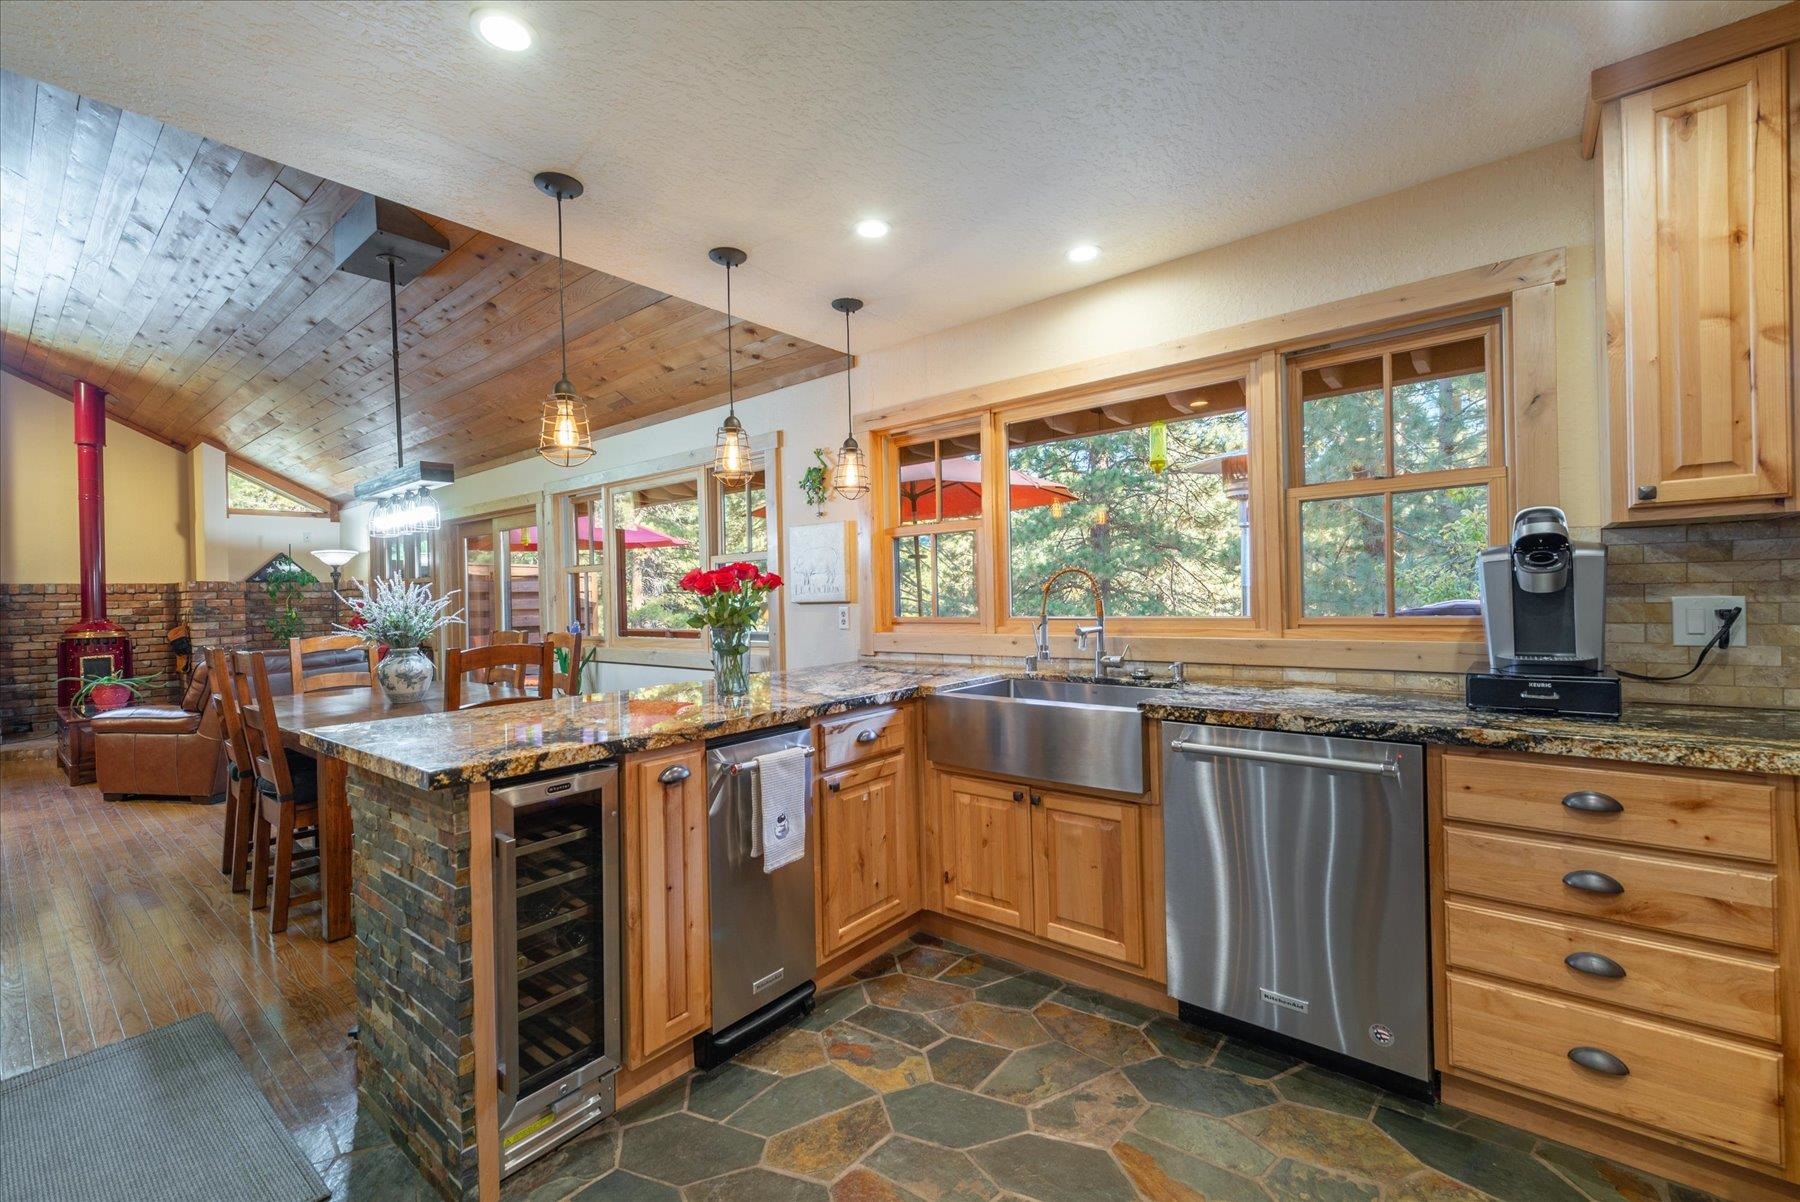 Image for 10620 Palisades Drive, Truckee, CA 96161-3112